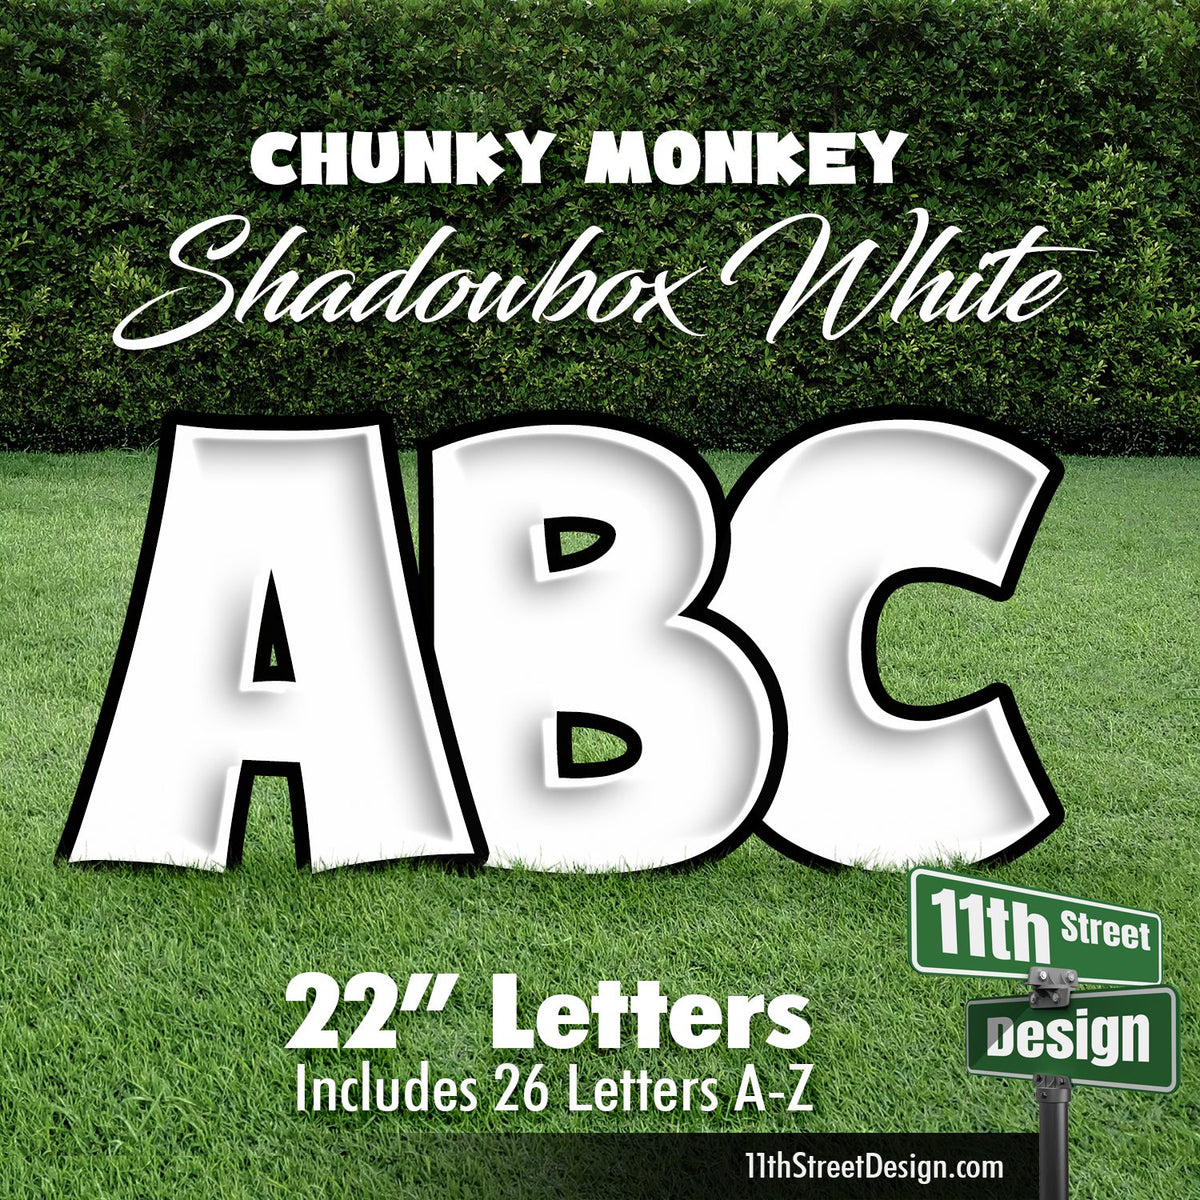 Shadowbox White 22&quot; Chunky Monkey 26 Letter Alphabet Yard Card Set Includes Letters A-Z